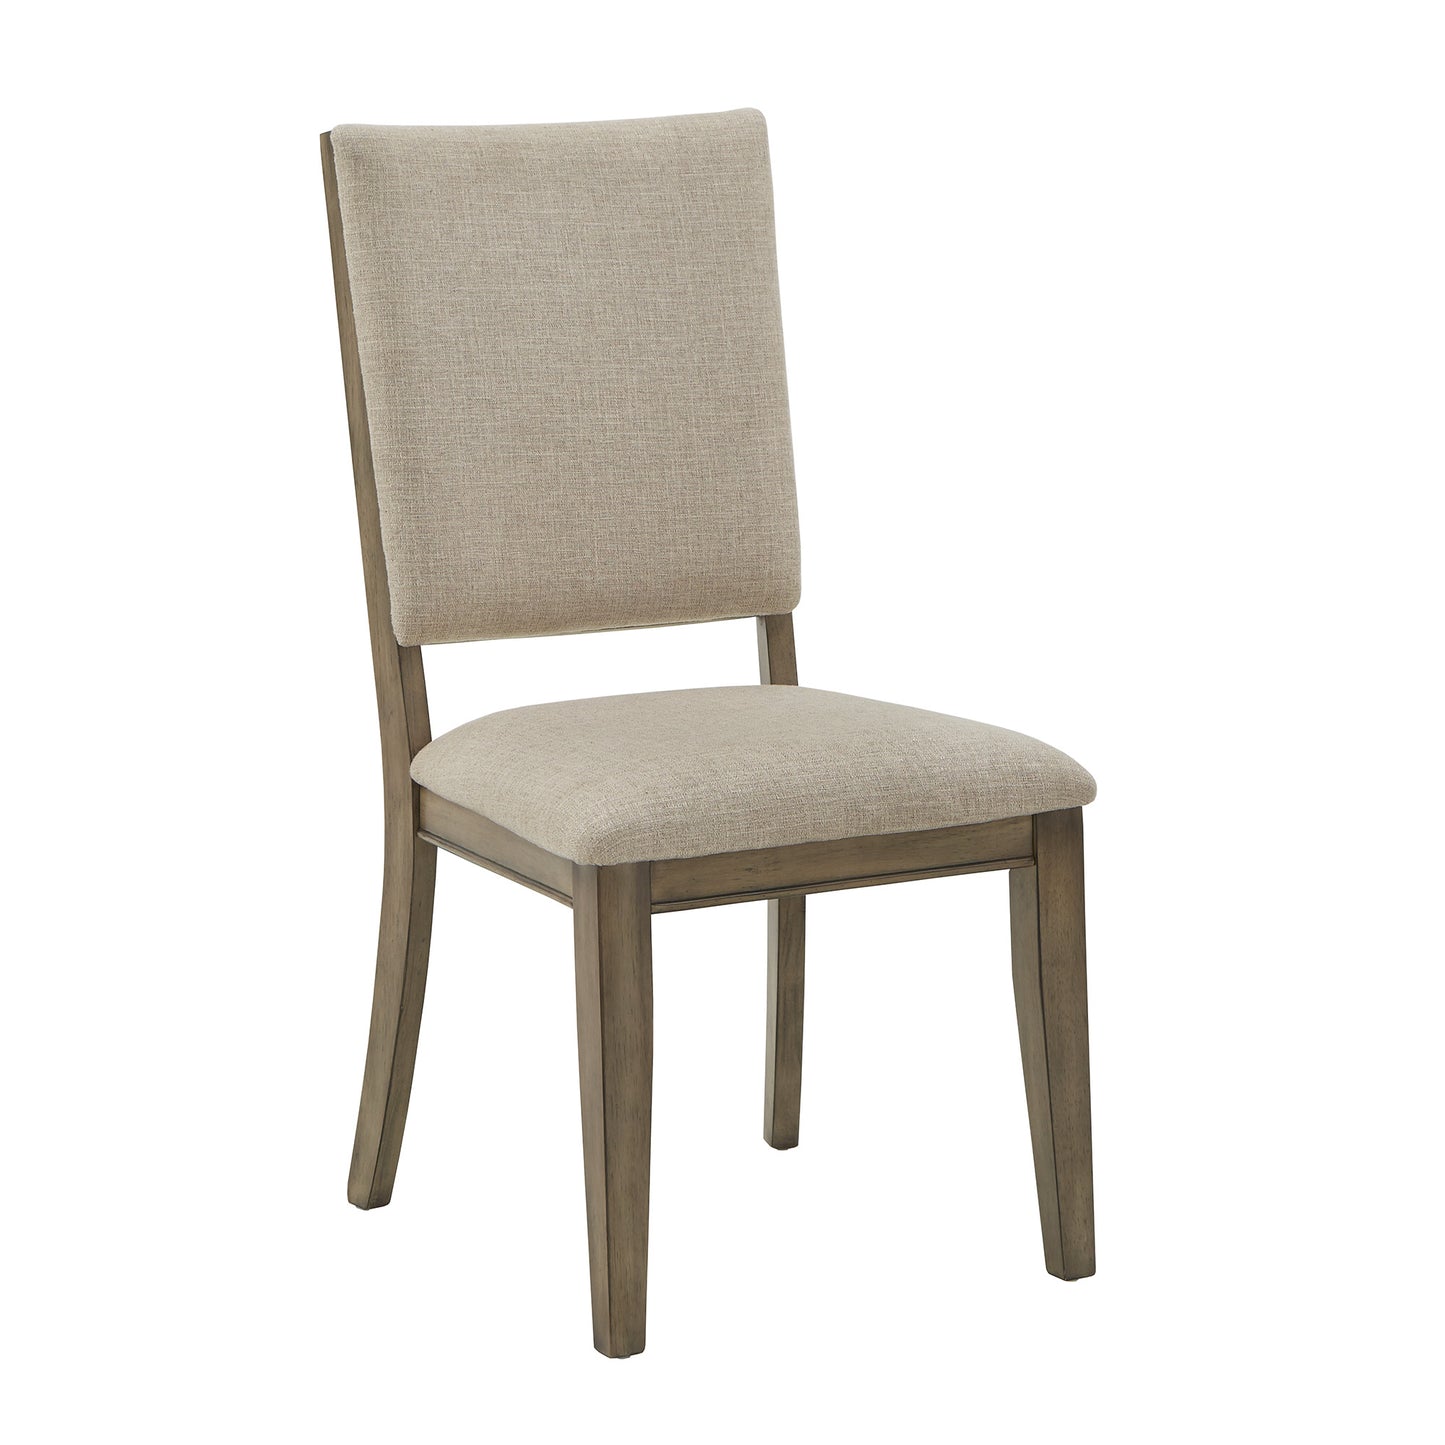 Antique Beige Fabric Dining Chairs (Set of 2)